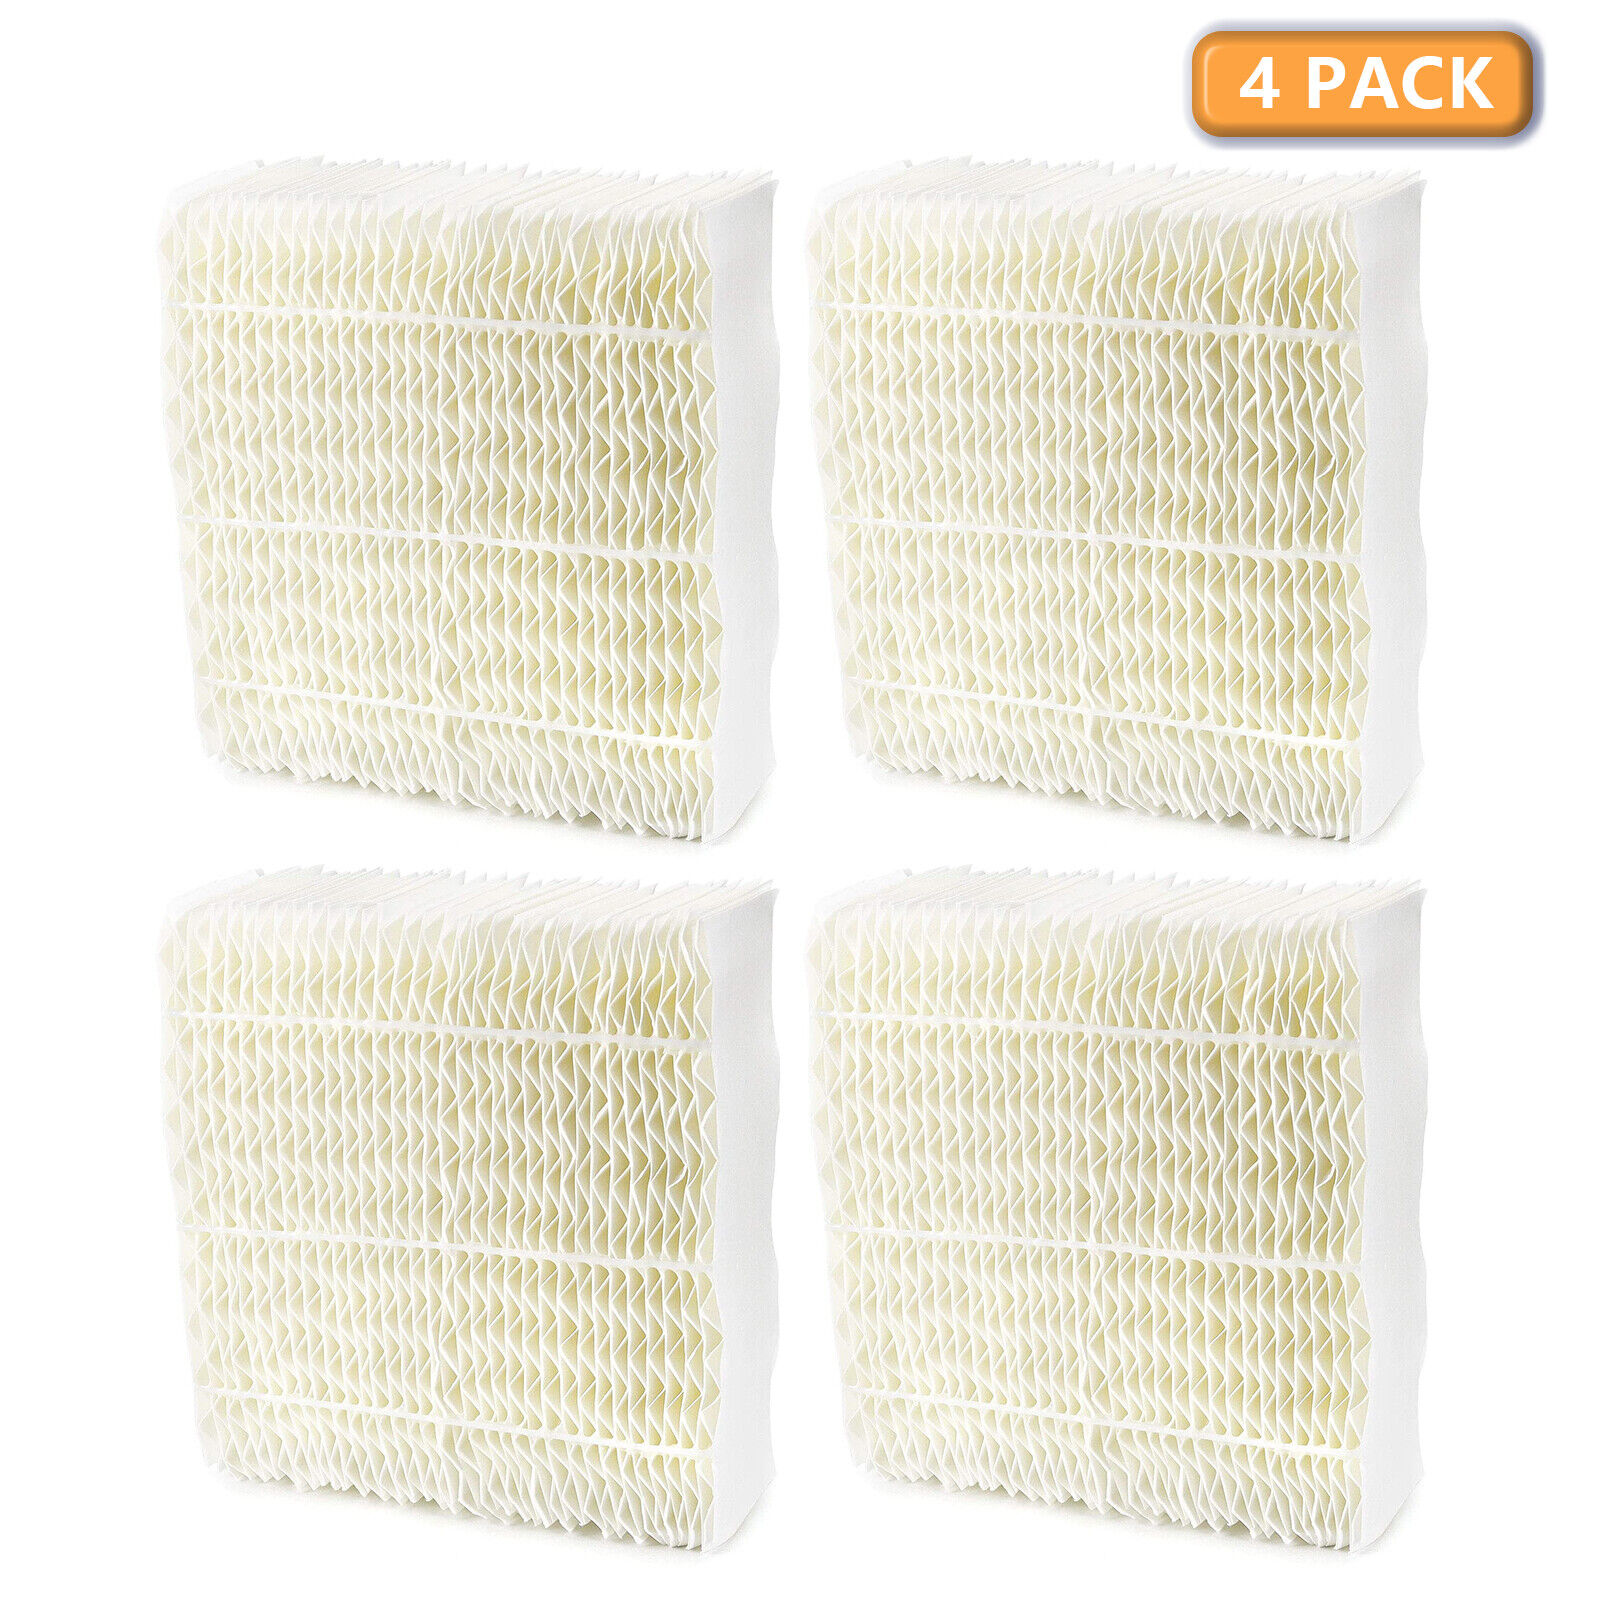 Humidifier Filters for AirCare 1043 Wick Super Bemis Essick Air 4 PACK